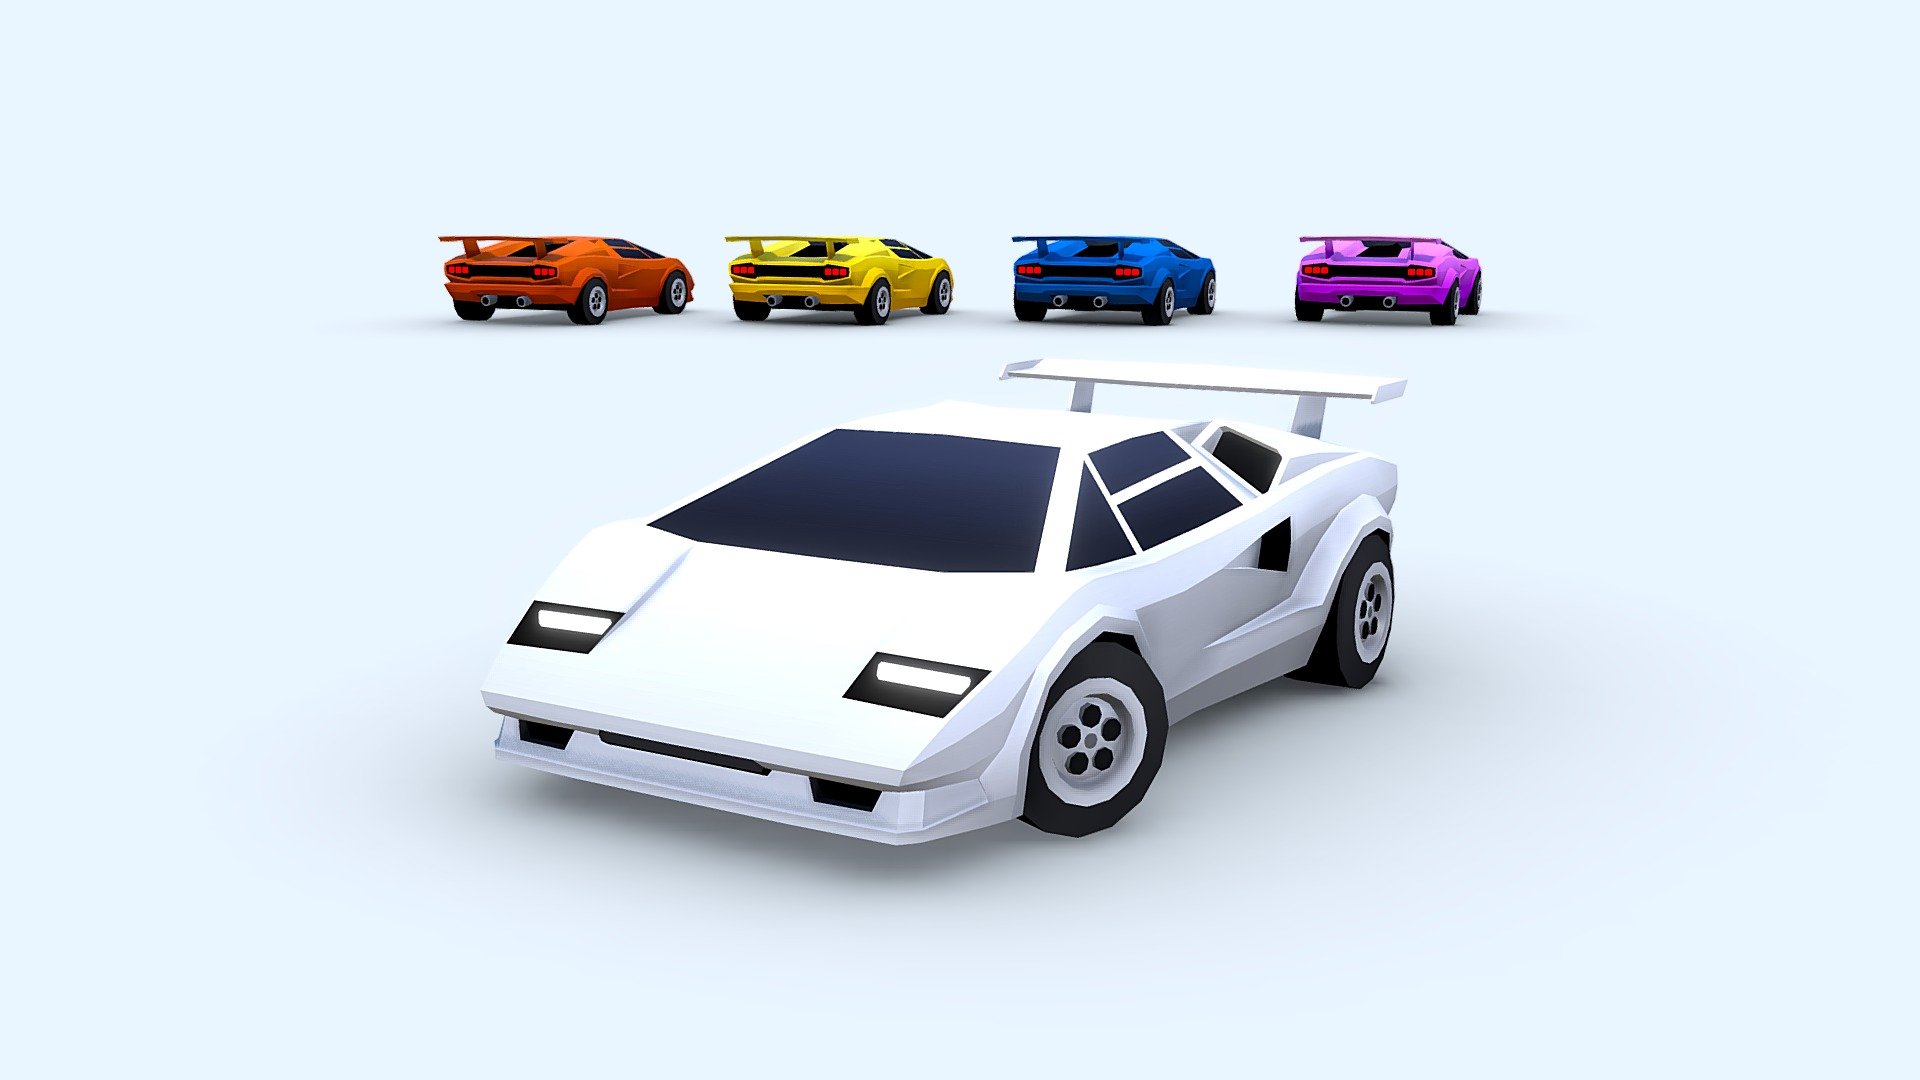 A Lamborghini Countach modeled in cartoon style!:


5 colors.
3144 triangles (wheels included).
FBX files included.
Cars use 2 materials (texture atlas of 512px * 512px).
Cartoon design.

This car is part of: CARS - Cute Racing Set - Cartoon Lamborghini Countach 1985 - Buy Royalty Free 3D model by SunsetStudio 3d model